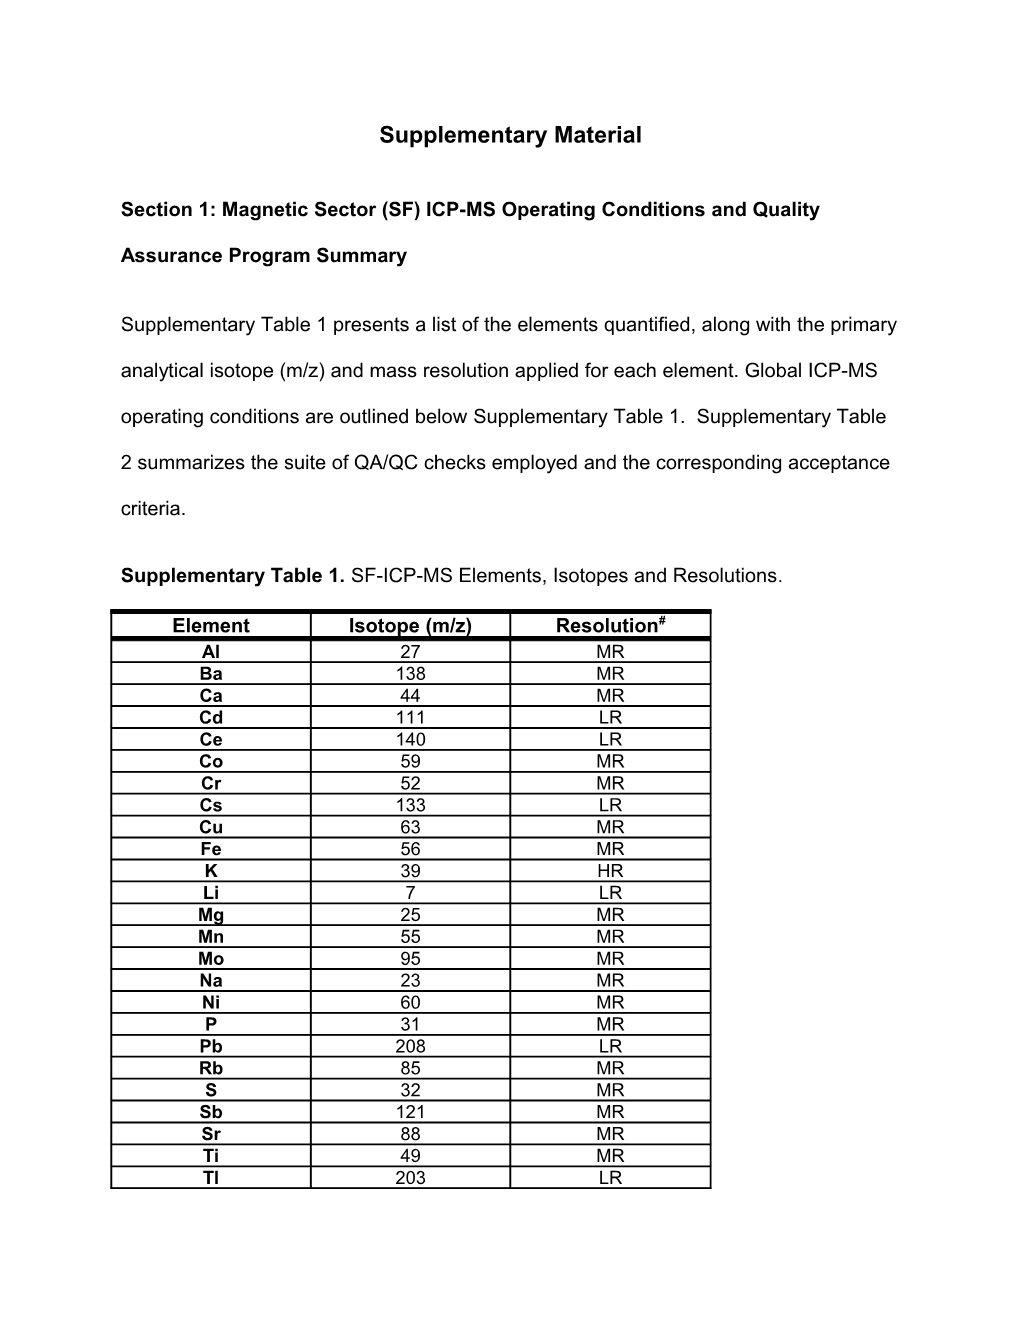 Section 1: Magnetic Sector (SF) ICP-MS Operating Conditions and Quality Assurance Program